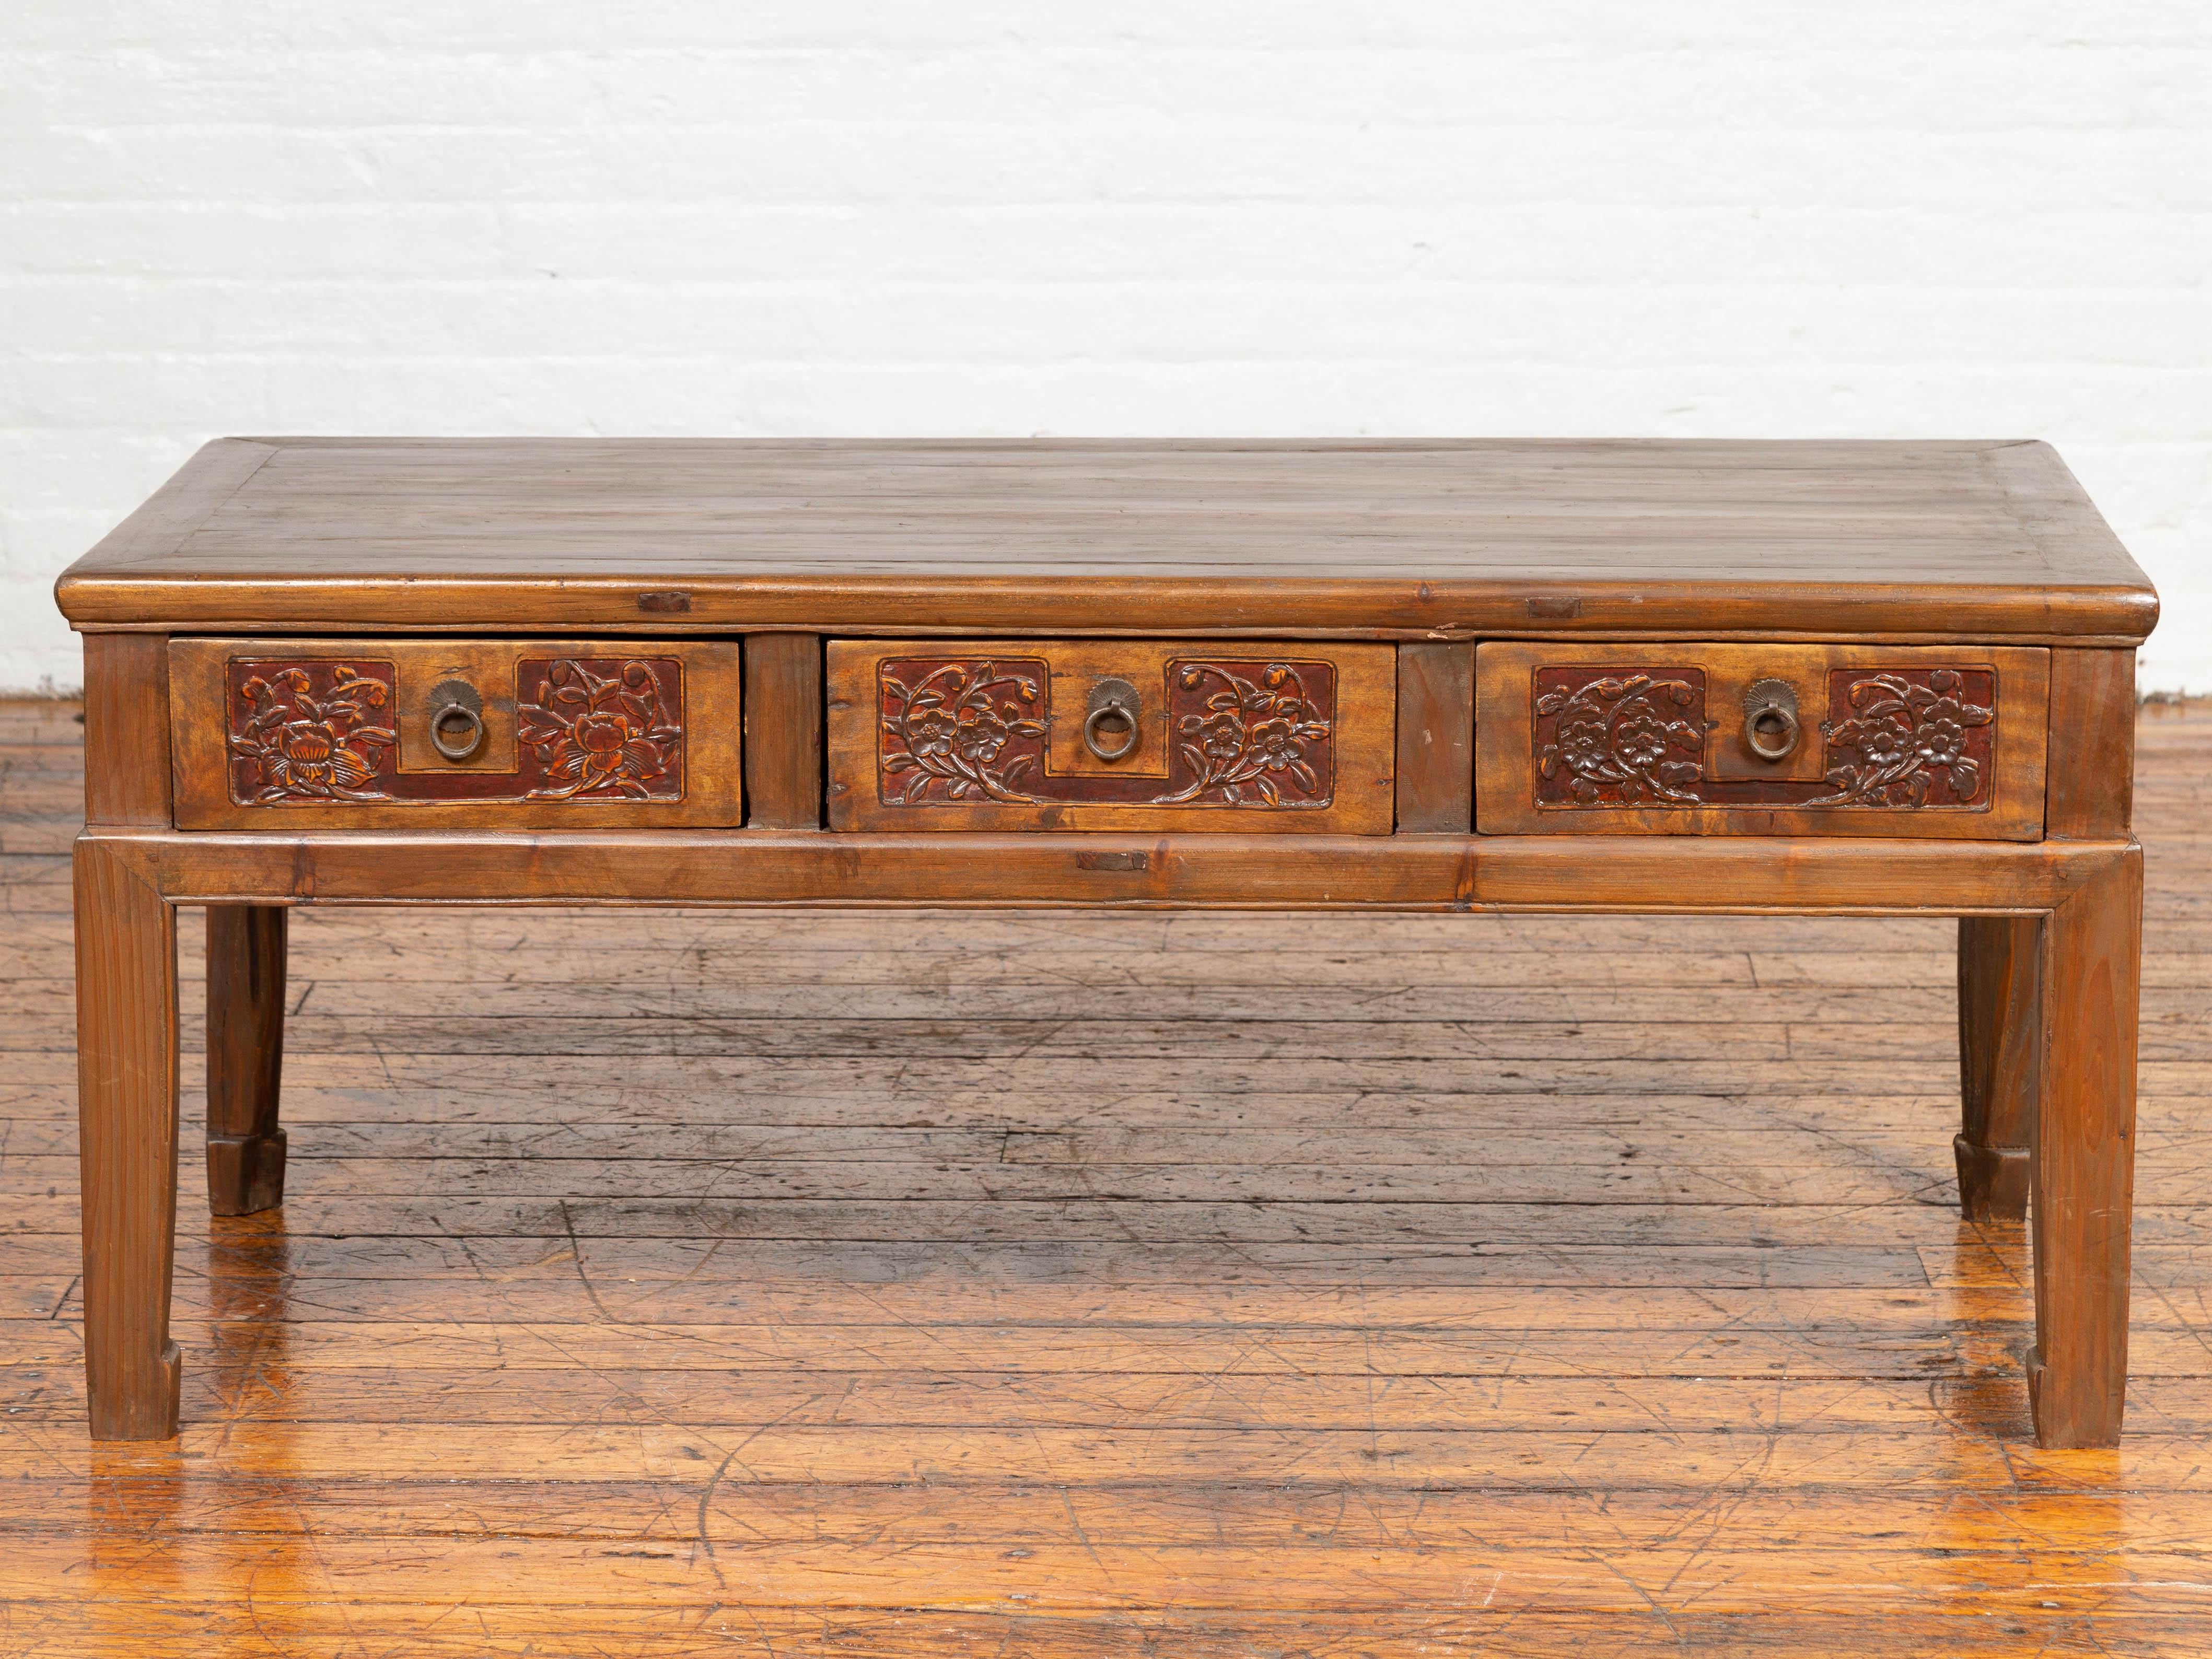 An antique Chinese elmwood coffee table with three carved drawers and horsehoof feet. Featuring a rectangular top with central board, this Chinese coffee table presents three drawers, each adorned with floral motifs carved in low-relief, standing